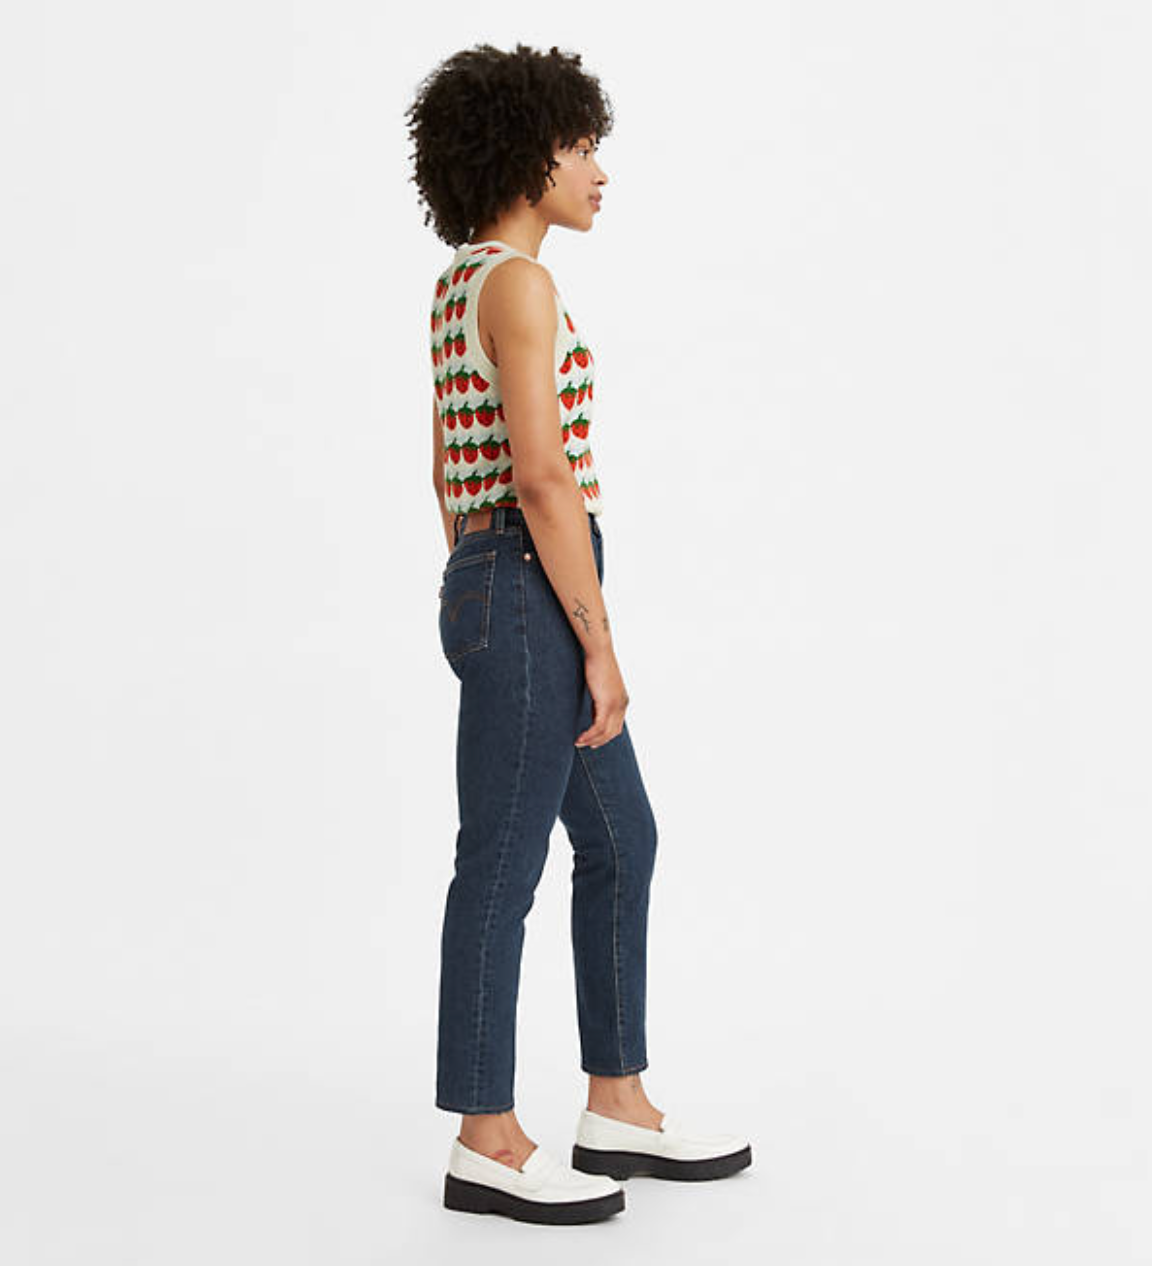 Wedgie Fit Ankle Woman's Jeans